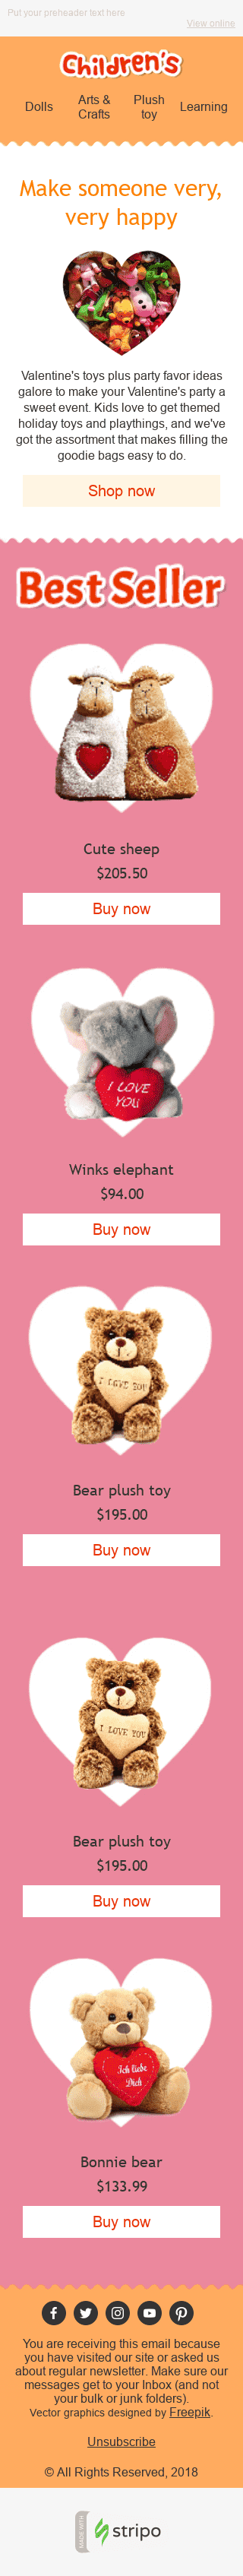 Valentine’s Day Email Template "Soft Gift" for Kids Goods industry mobile view